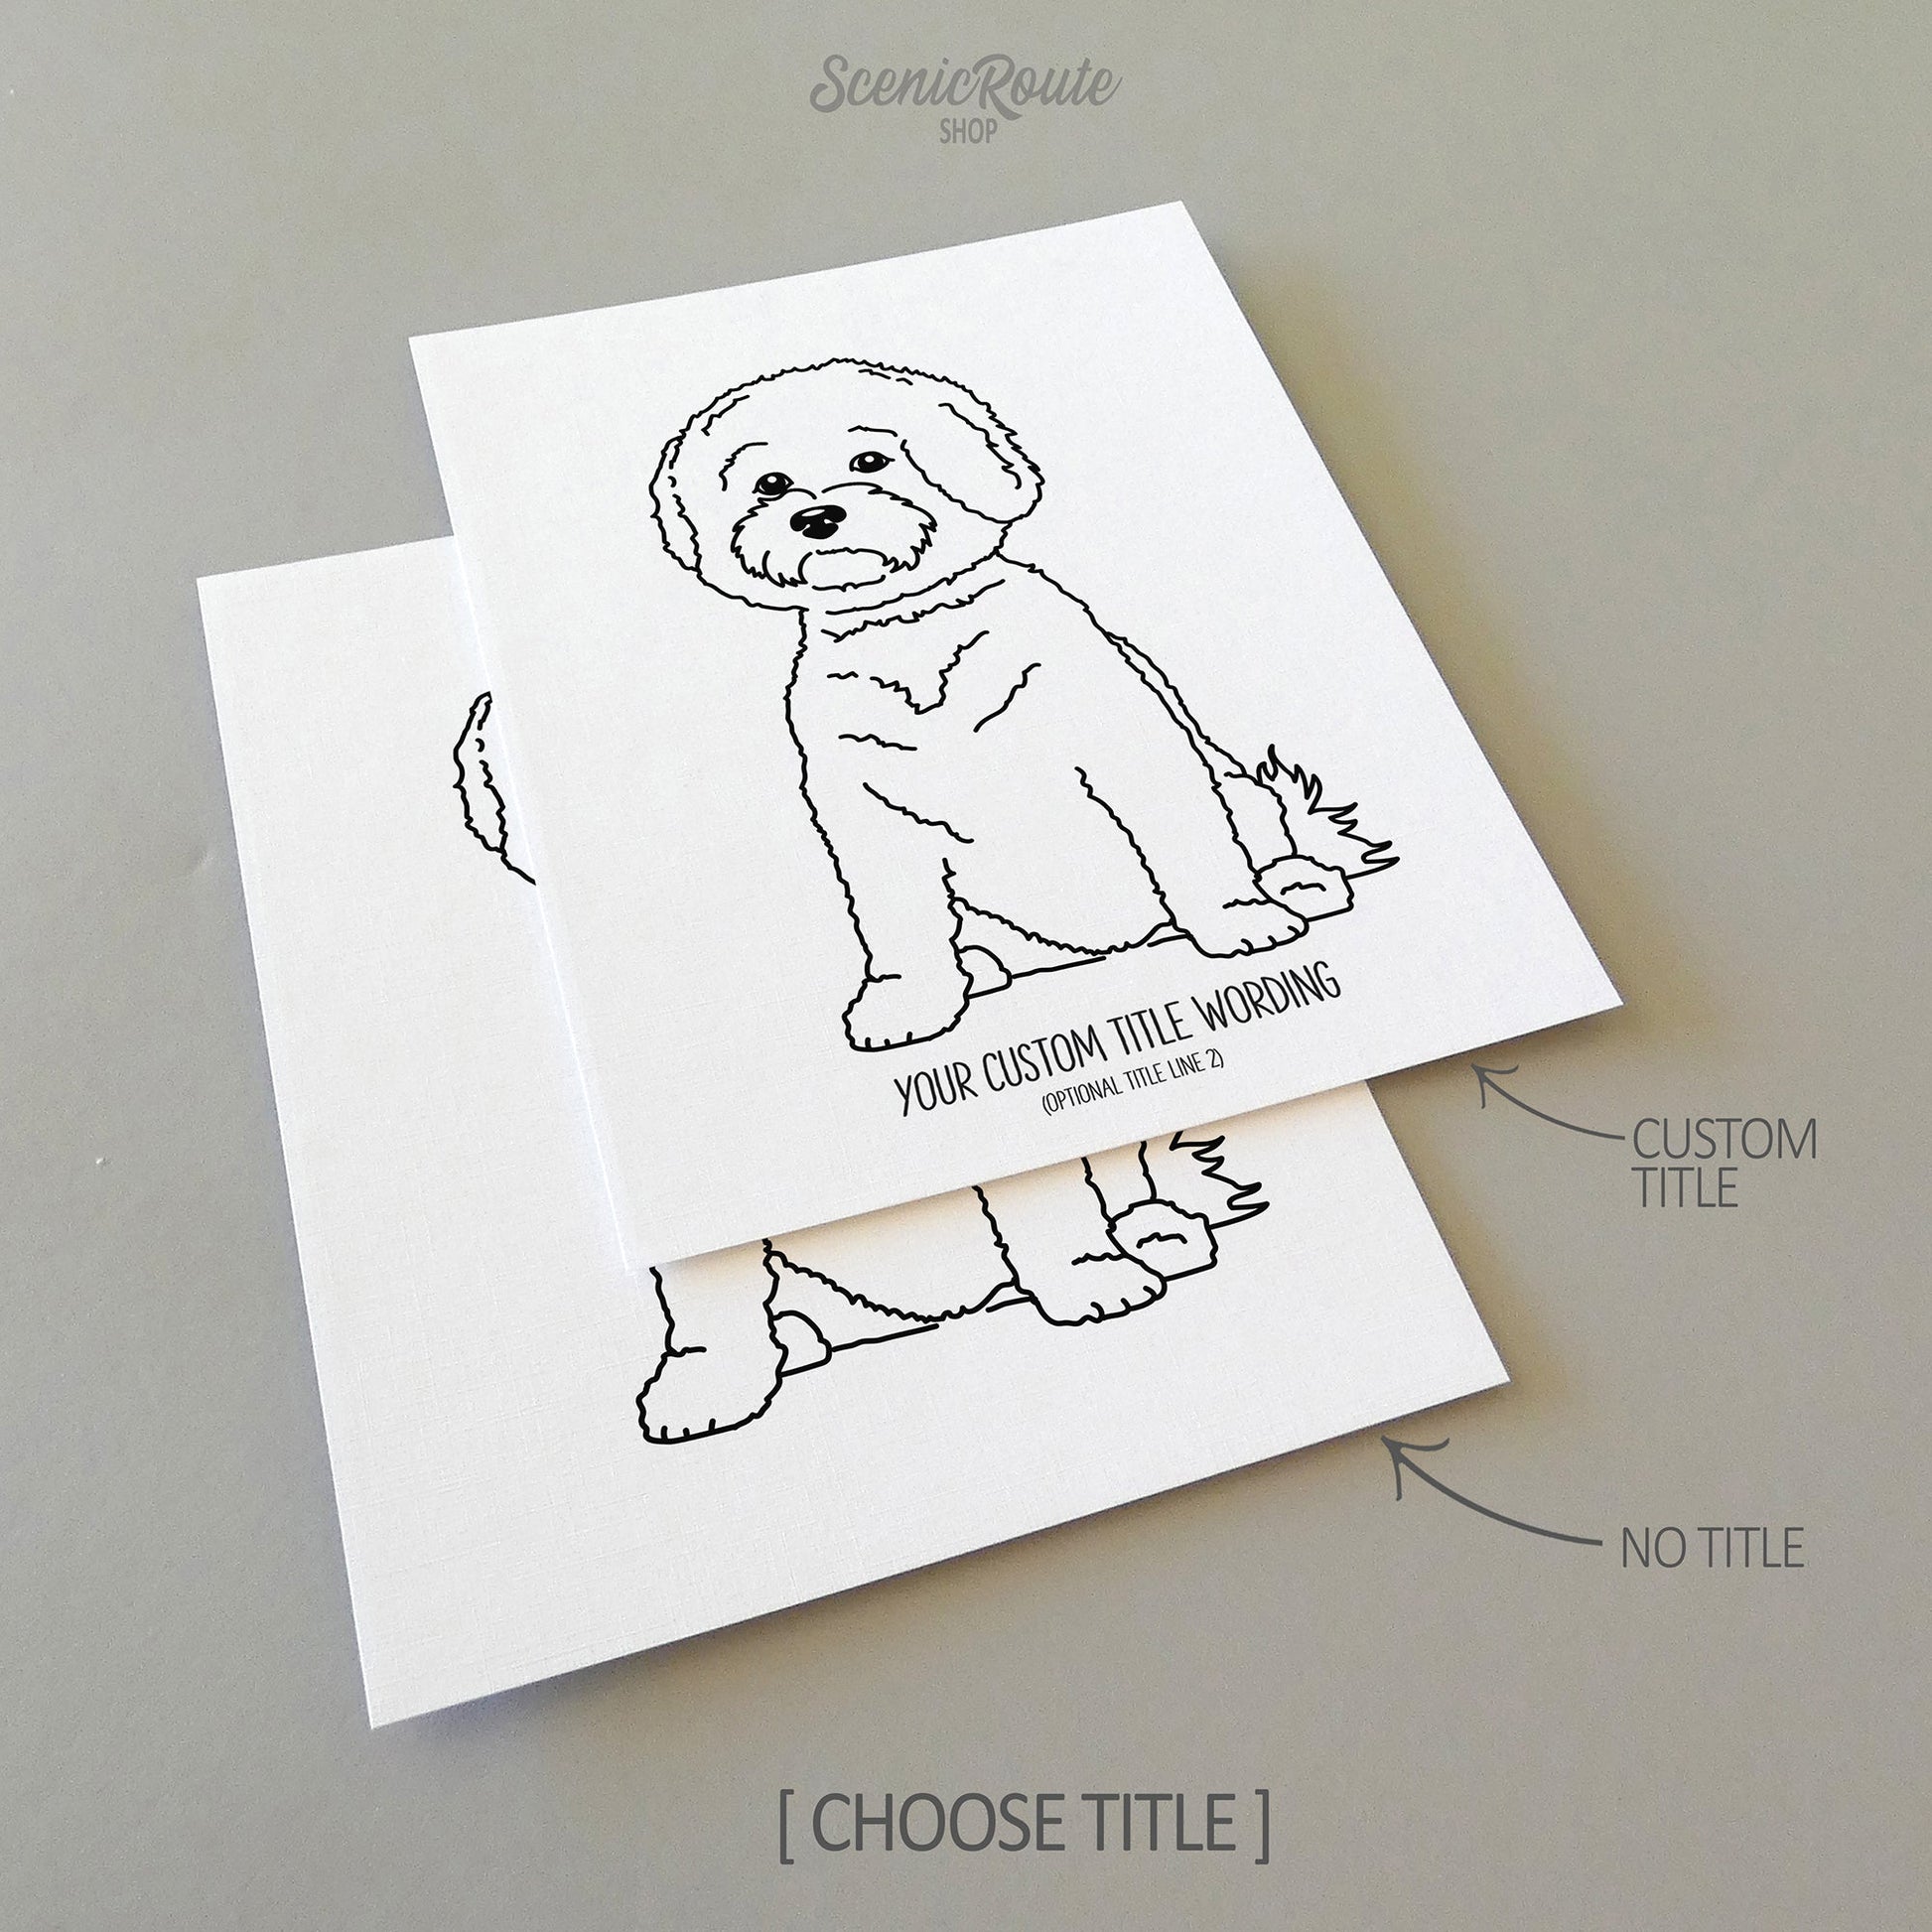 Two drawings of a Bichon Frise dog on white linen paper with a gray background.  Pieces are shown with “No Title” and “Custom Title” options to illustrate the available art print options.